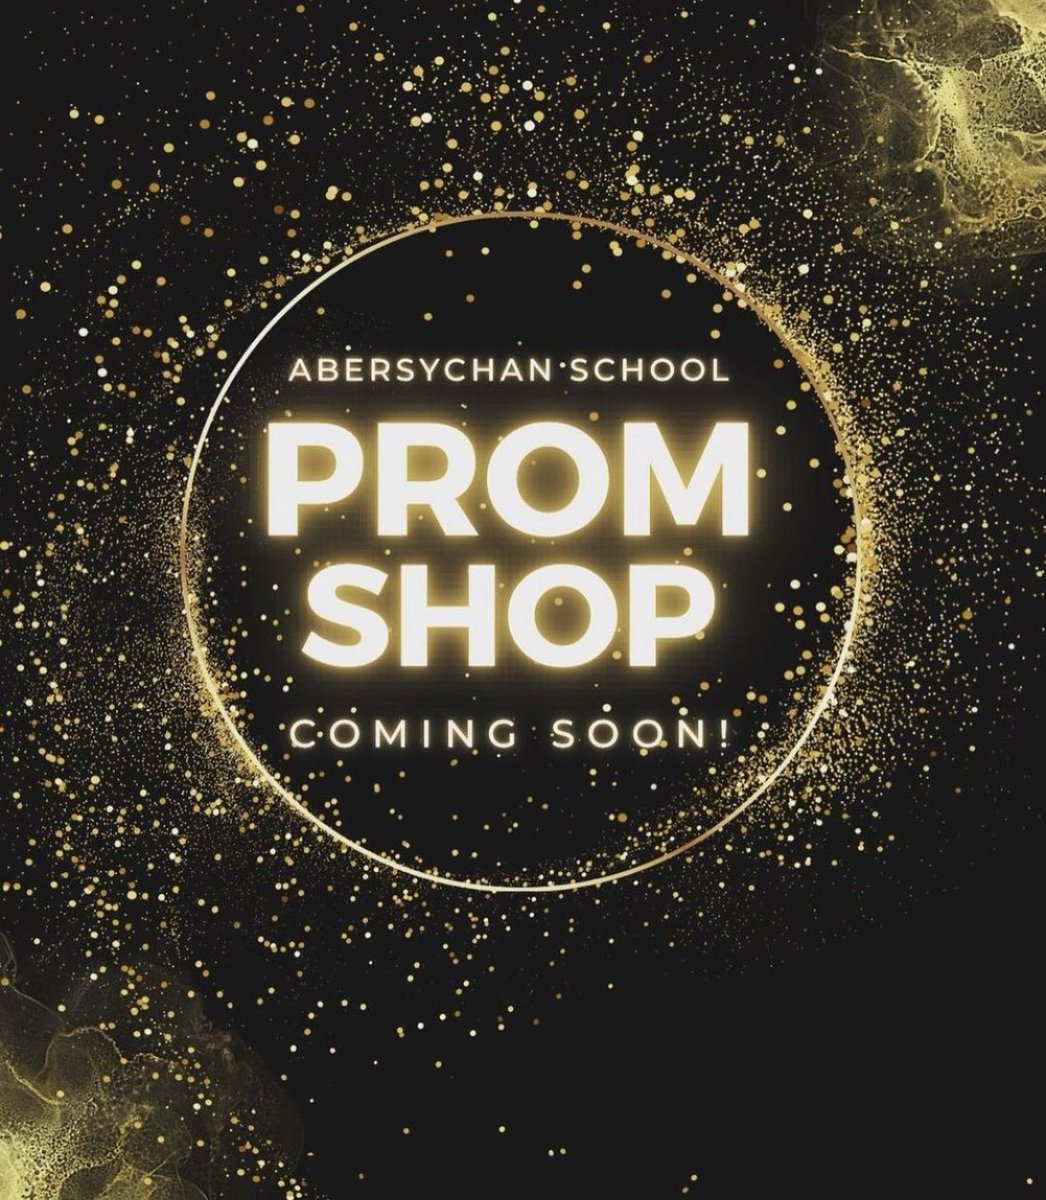 Our Abersychan Prom Shop will be opening its doors again soon. 👗👔 If anyone in our local community has any items they’d like to donate, please drop them into reception. @Abersychansch #aberpromshop